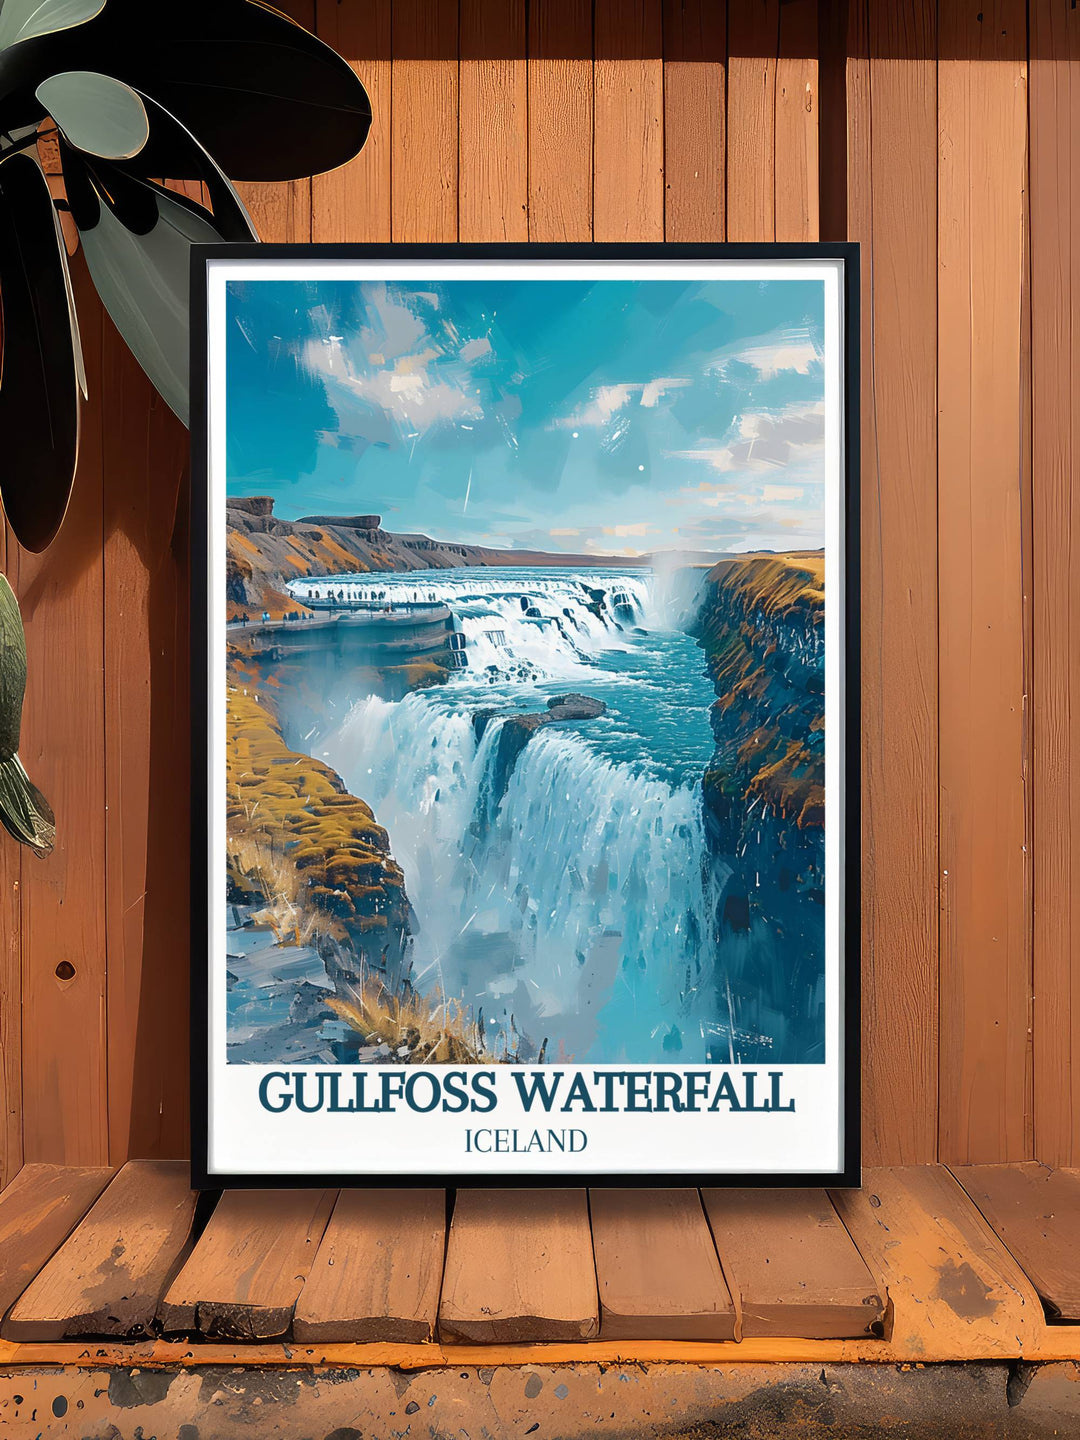 Early morning mist rising from Gullfoss Waterfall, adding a mystical quality to a national park poster.